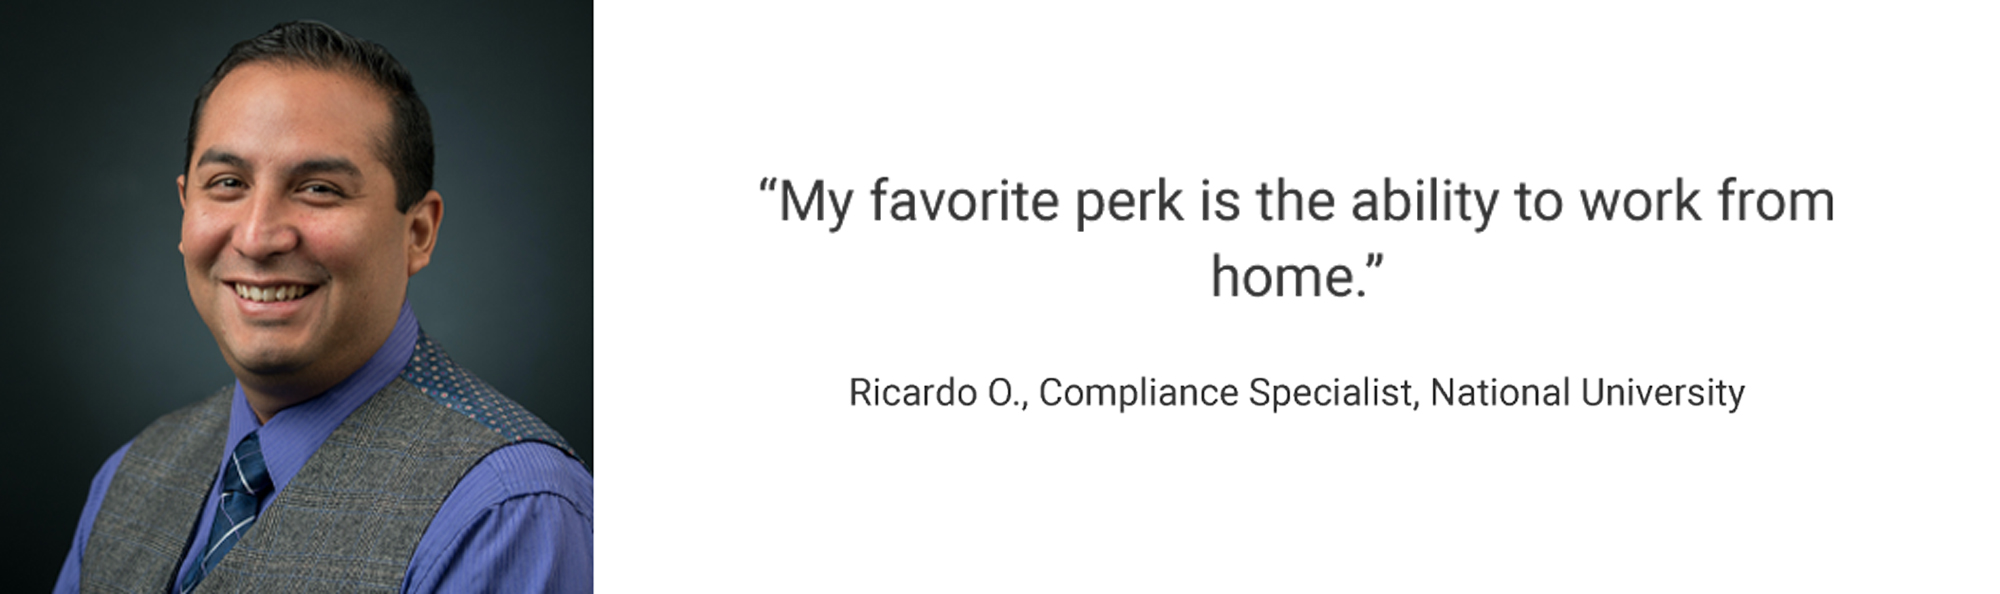 Employee Testimonial, "My favorite perk is the ability to work from home." Ricardo O., Compliance Specialist, National University